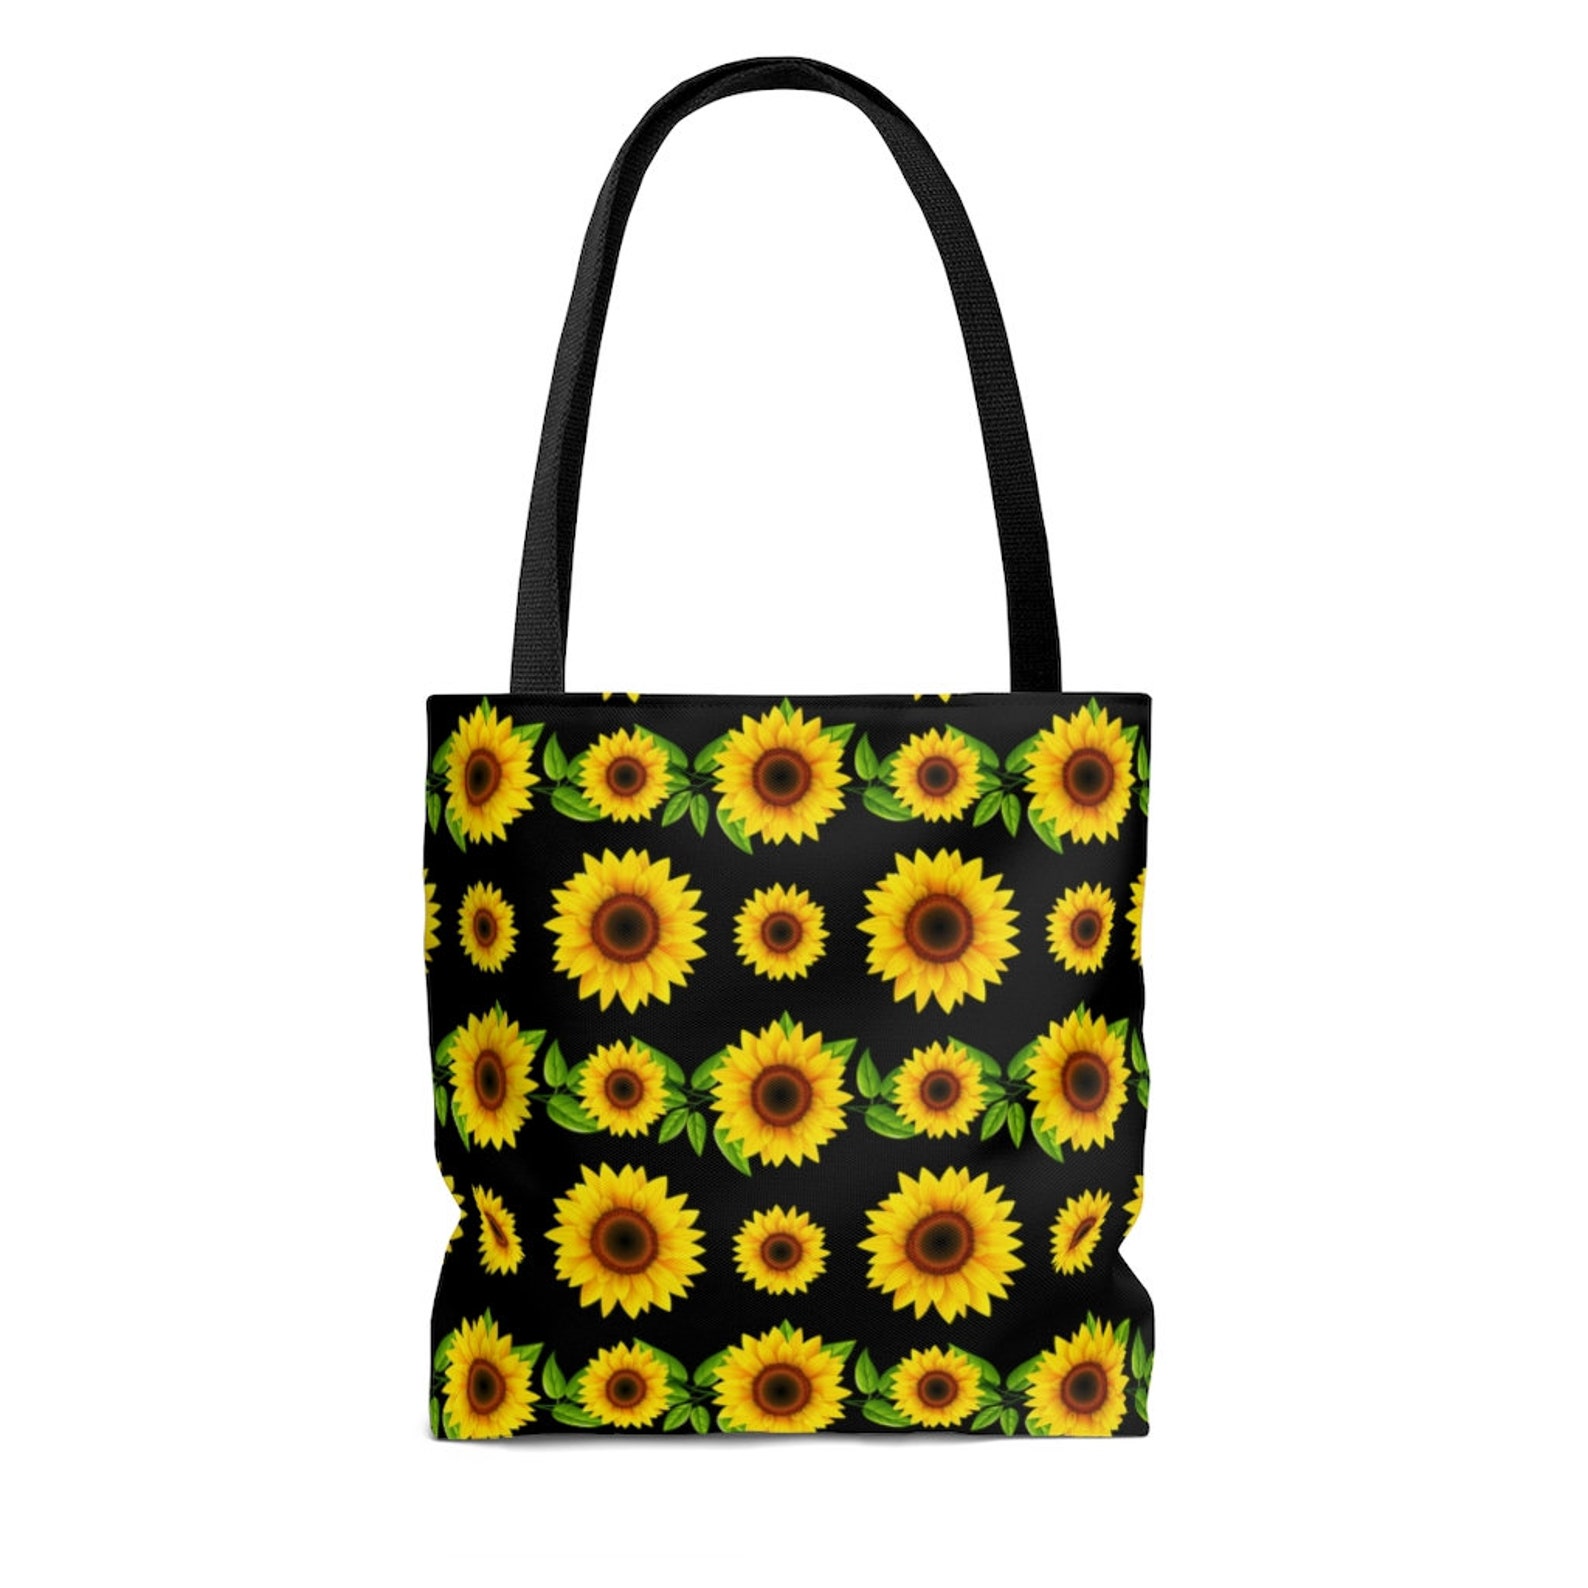 Sunflower tote bag double sided all over print tote black | Etsy